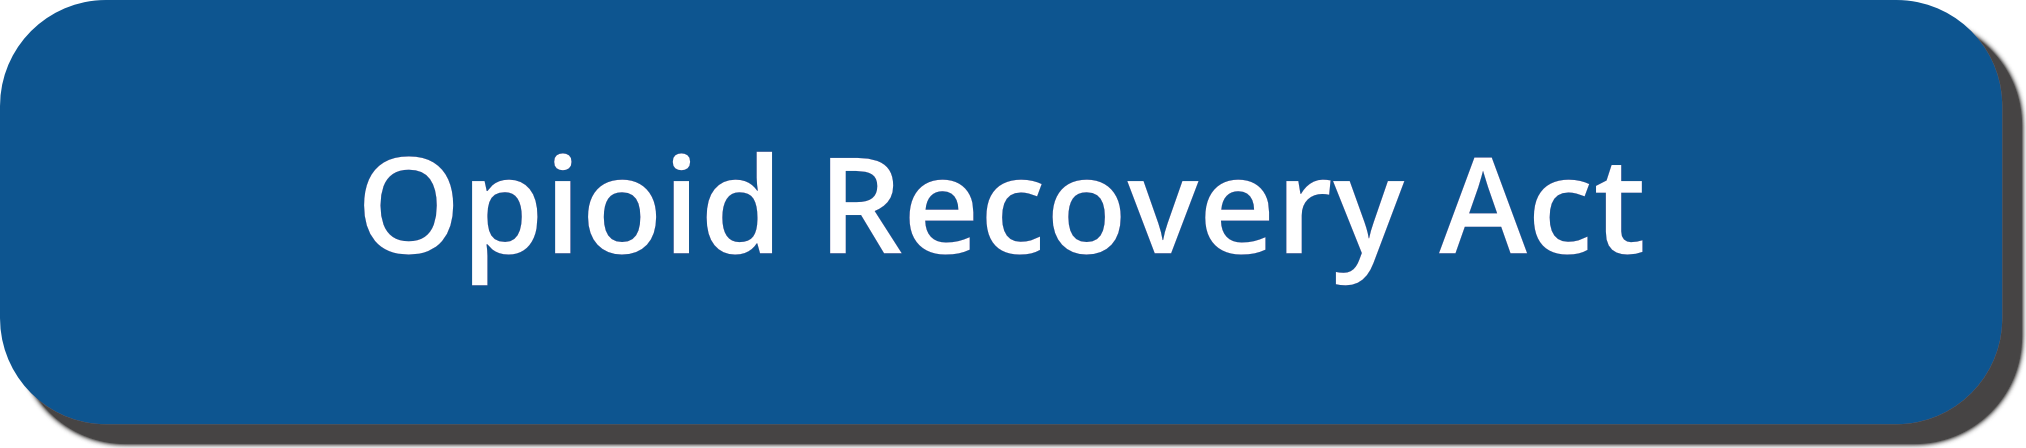 Opioid Recovery Act Button Link